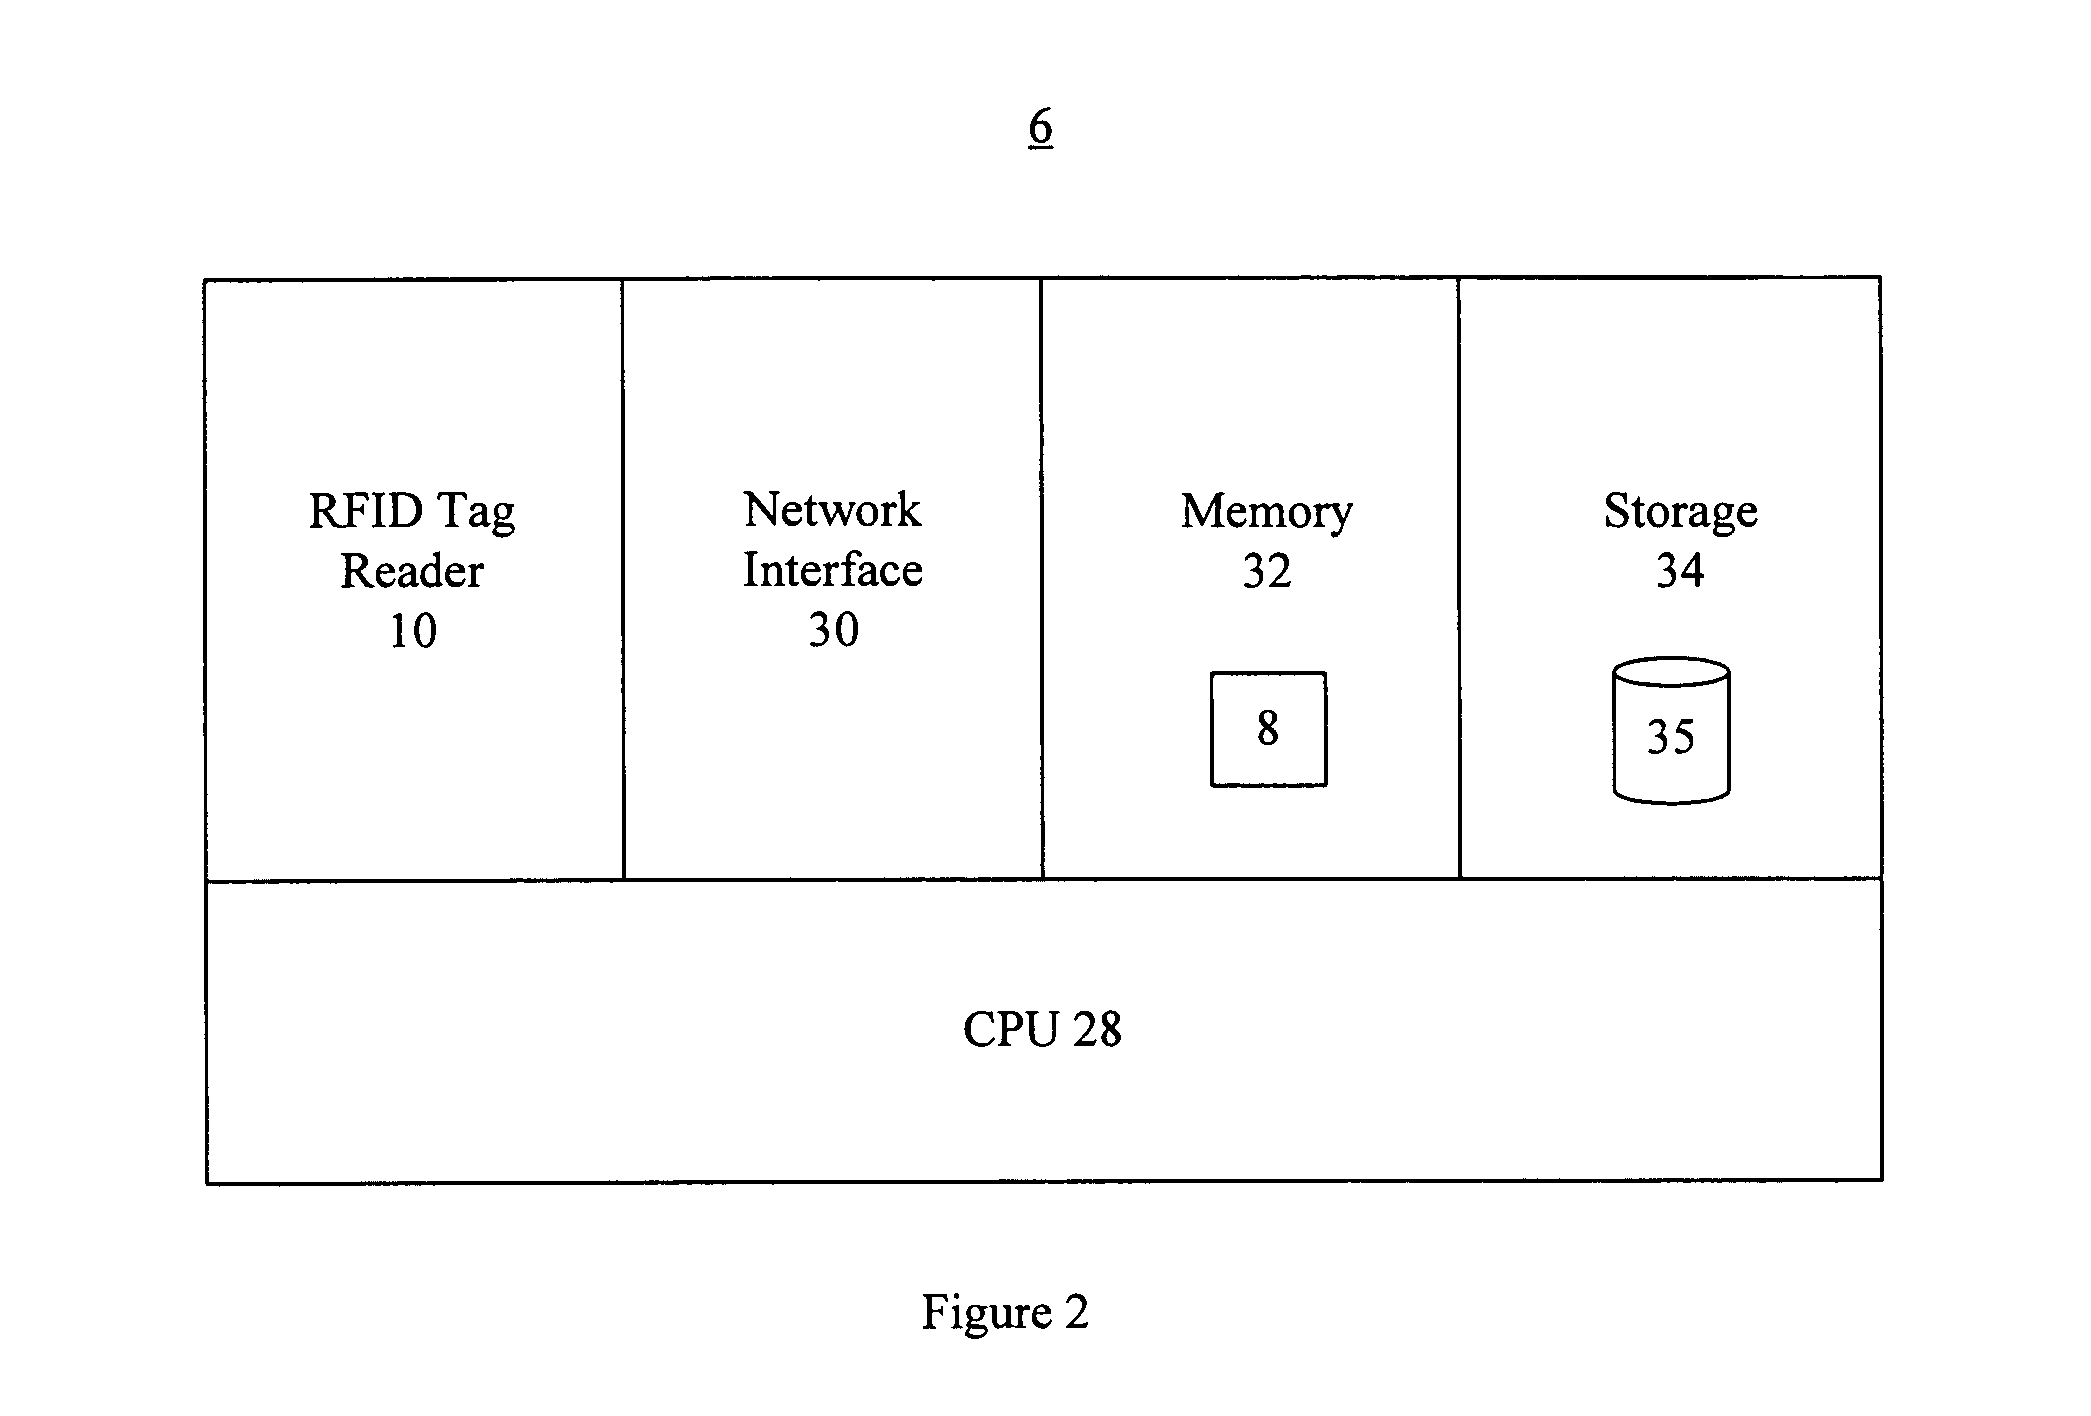 Method and apparatus for processing data using objects